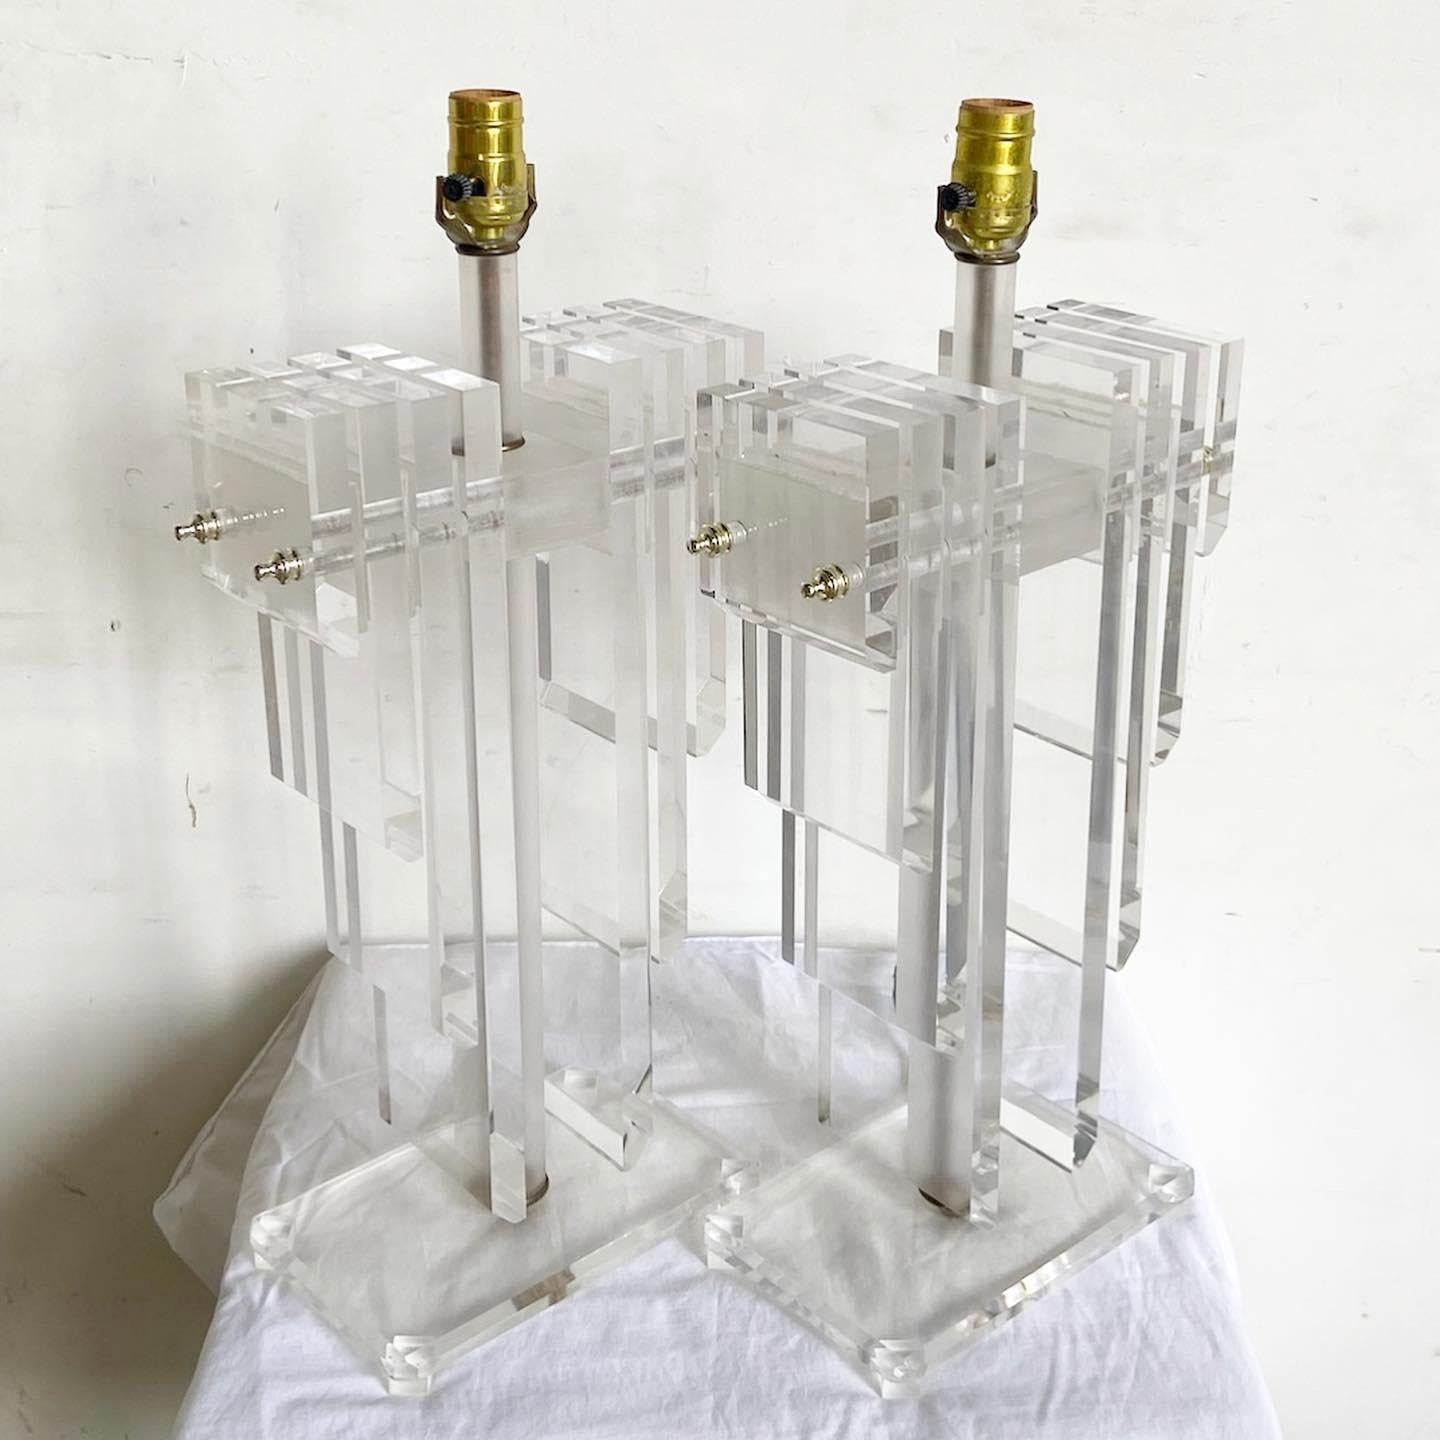 American Art Deco Stacked Lucite Table Lamps - a Pair For Sale